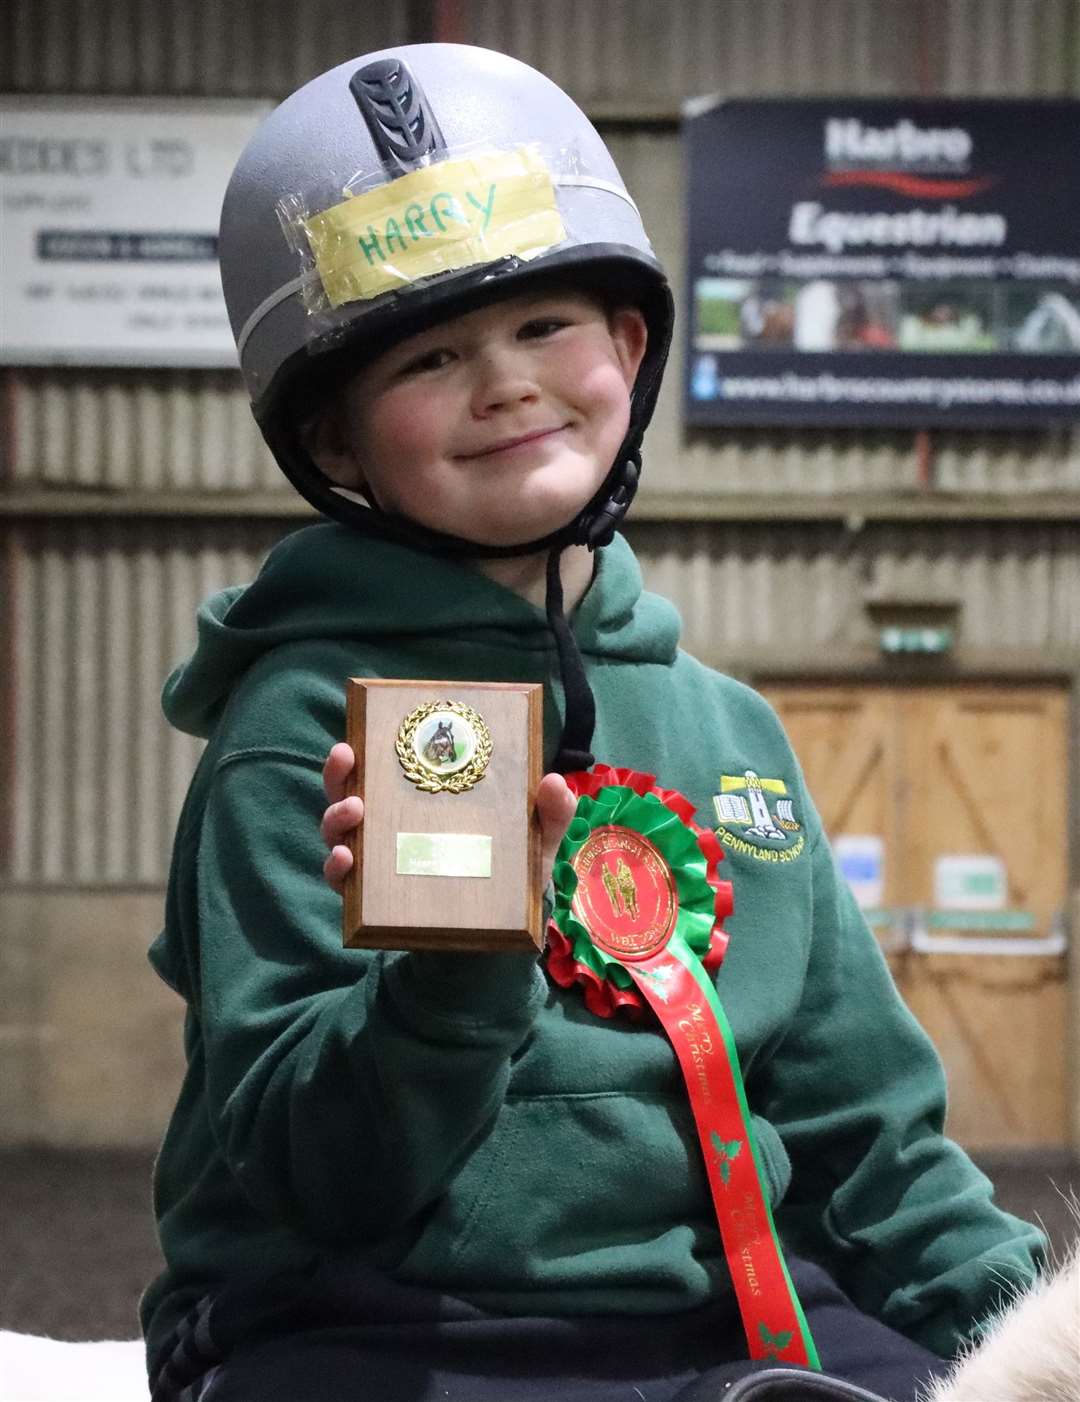 Harry Galloway proudly displays his shield for enthusiasm. Picture: Neil Buchan